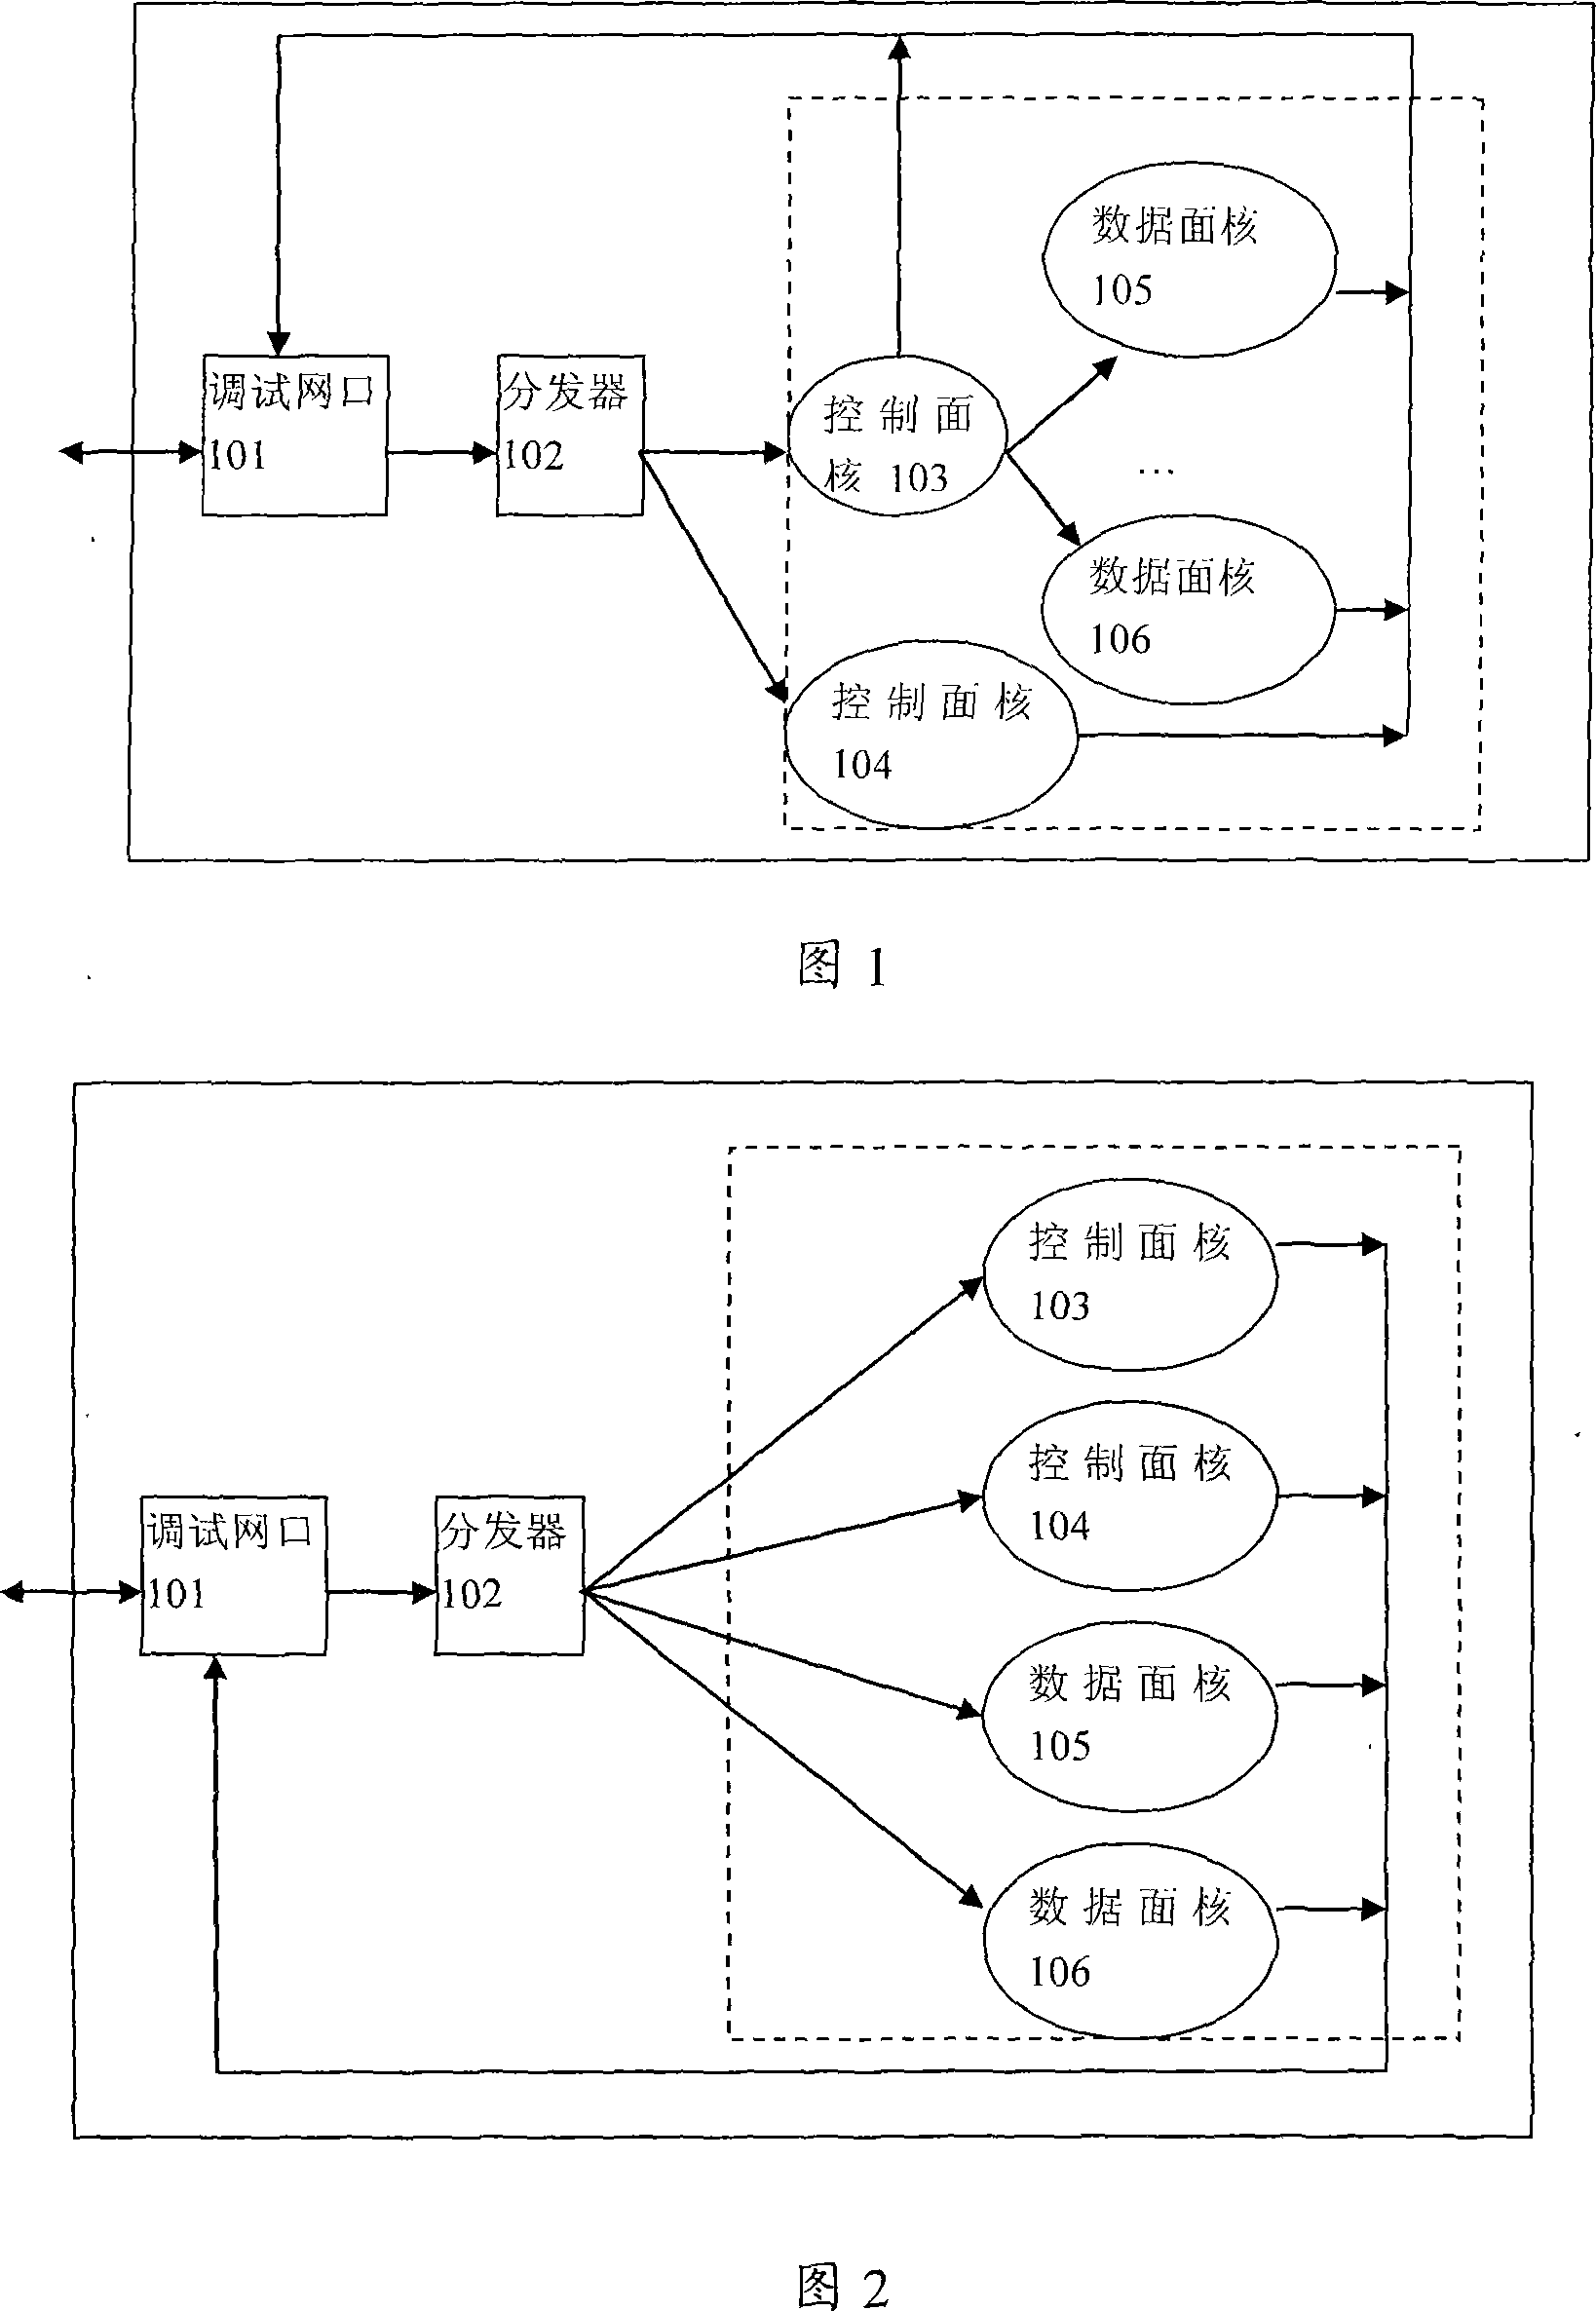 Method for realizing bare nucleus software debugging in multicore processor